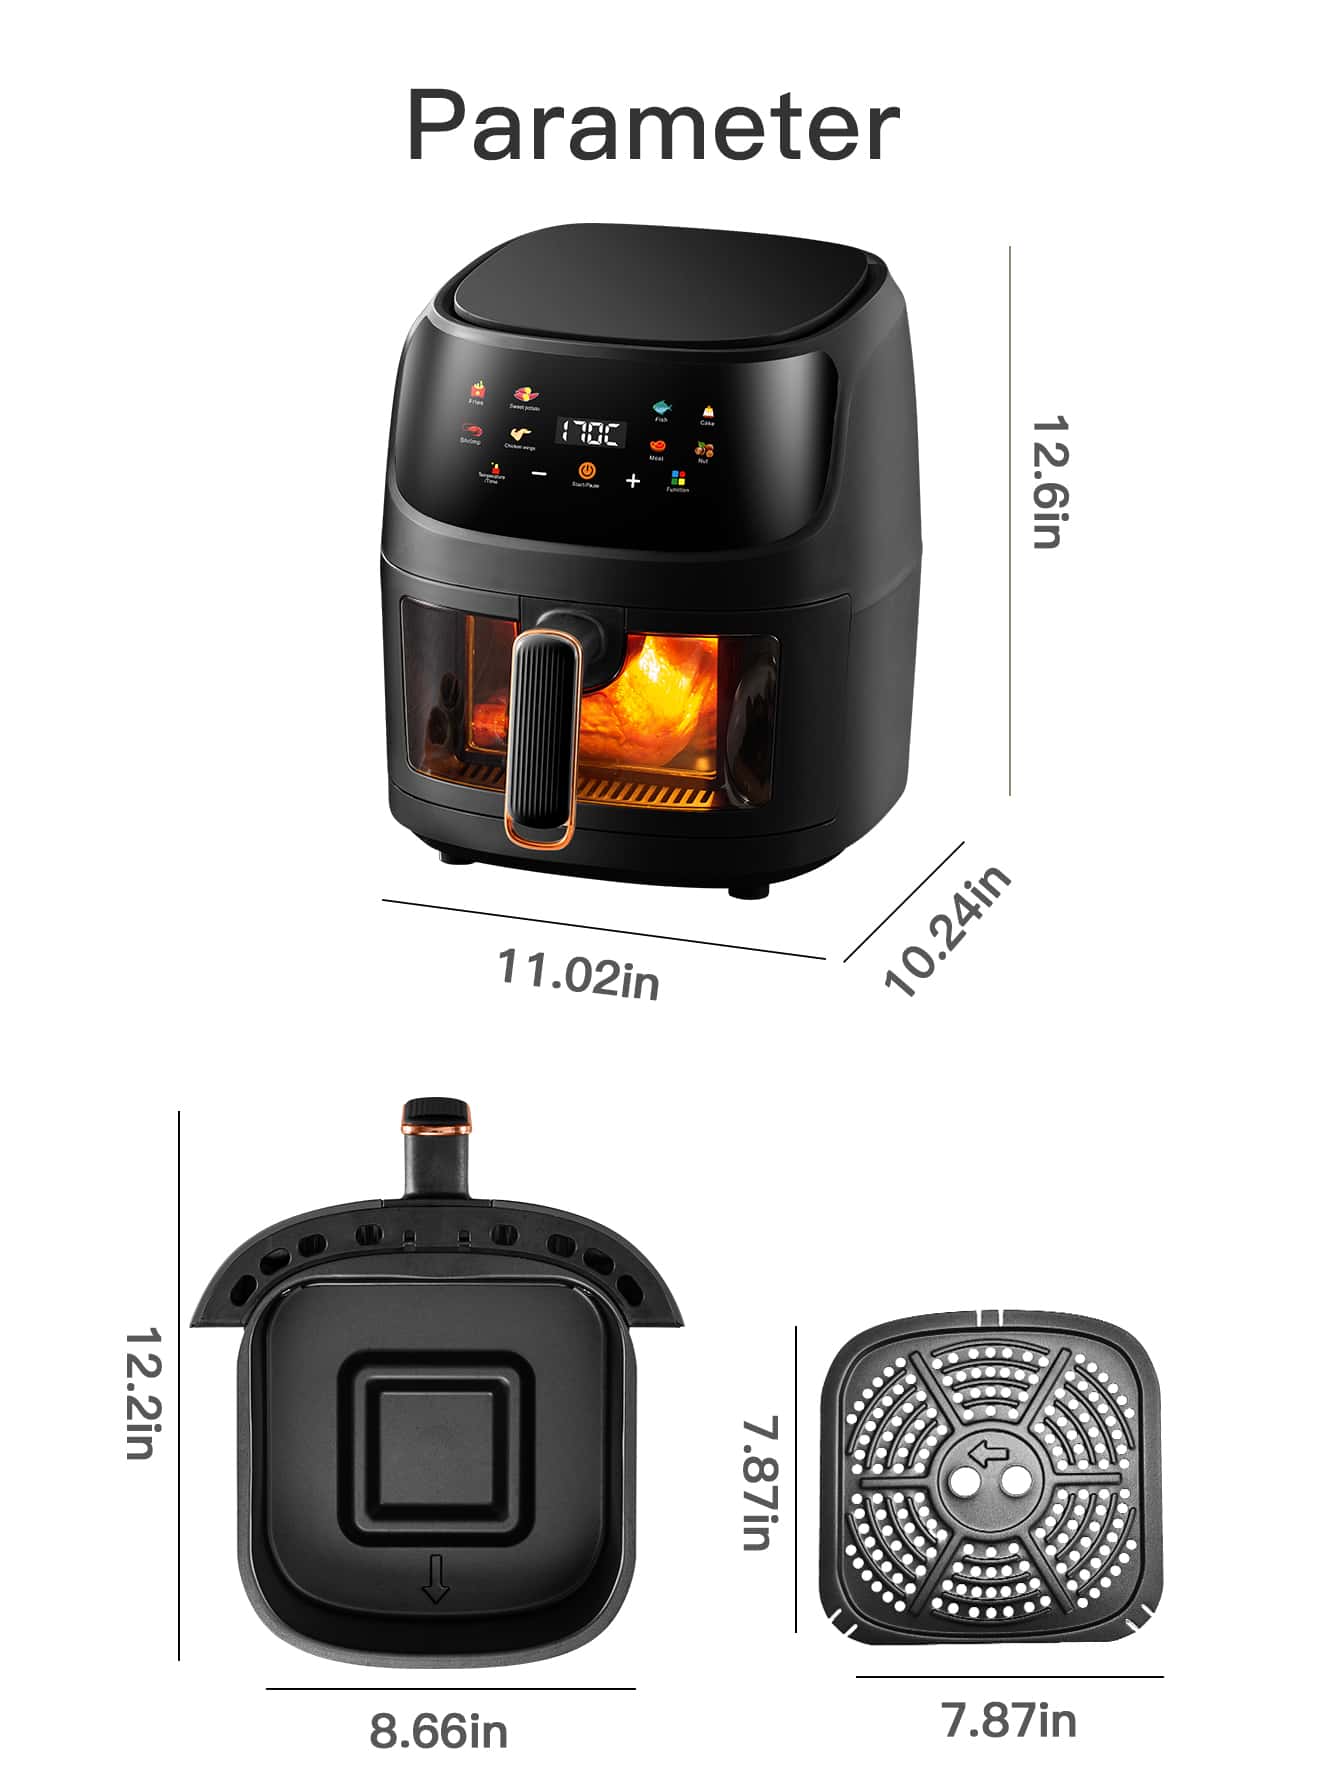 1pc Desktop Electric 6l Large Capacity Multi-functional Visible Air Fryer Qf-606 With Color Touch Screen, Suitable For Party Chicken Wings, Fries, Steak, For Home Cooking-Black-10